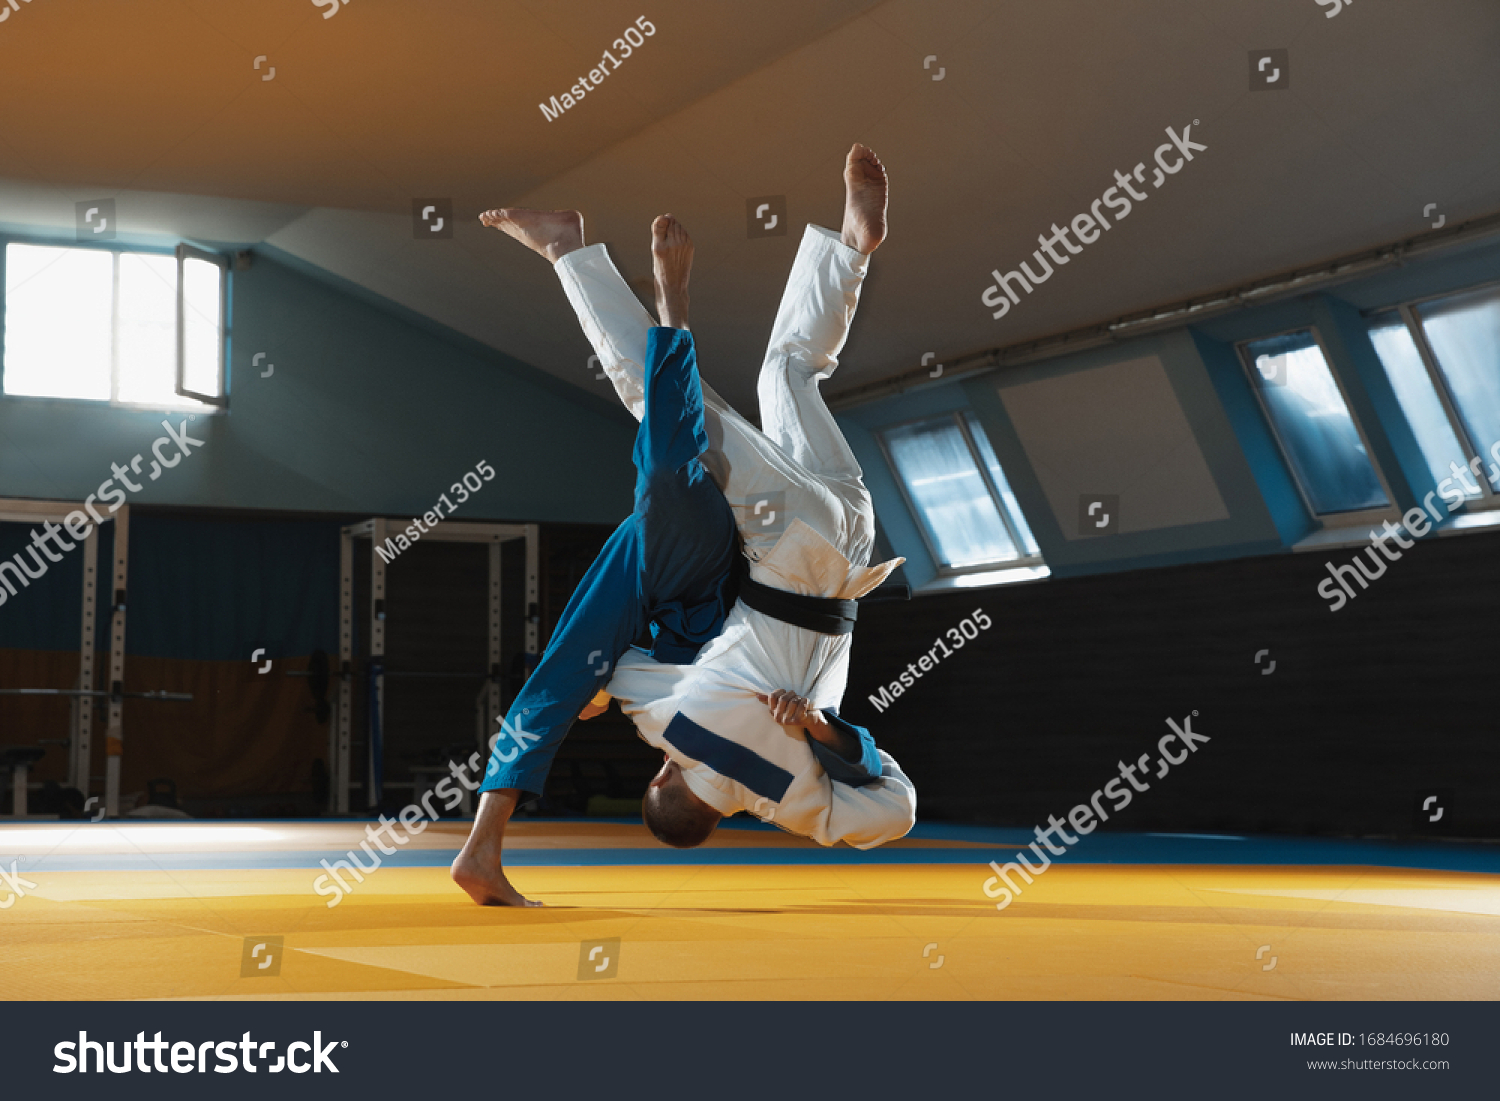 Two young judo caucasian fighters in white and blue kimono with black belts training martial arts in the gym with expression, in action, motion. Practicing fighting skills. Overcoming, reaching target #1684696180